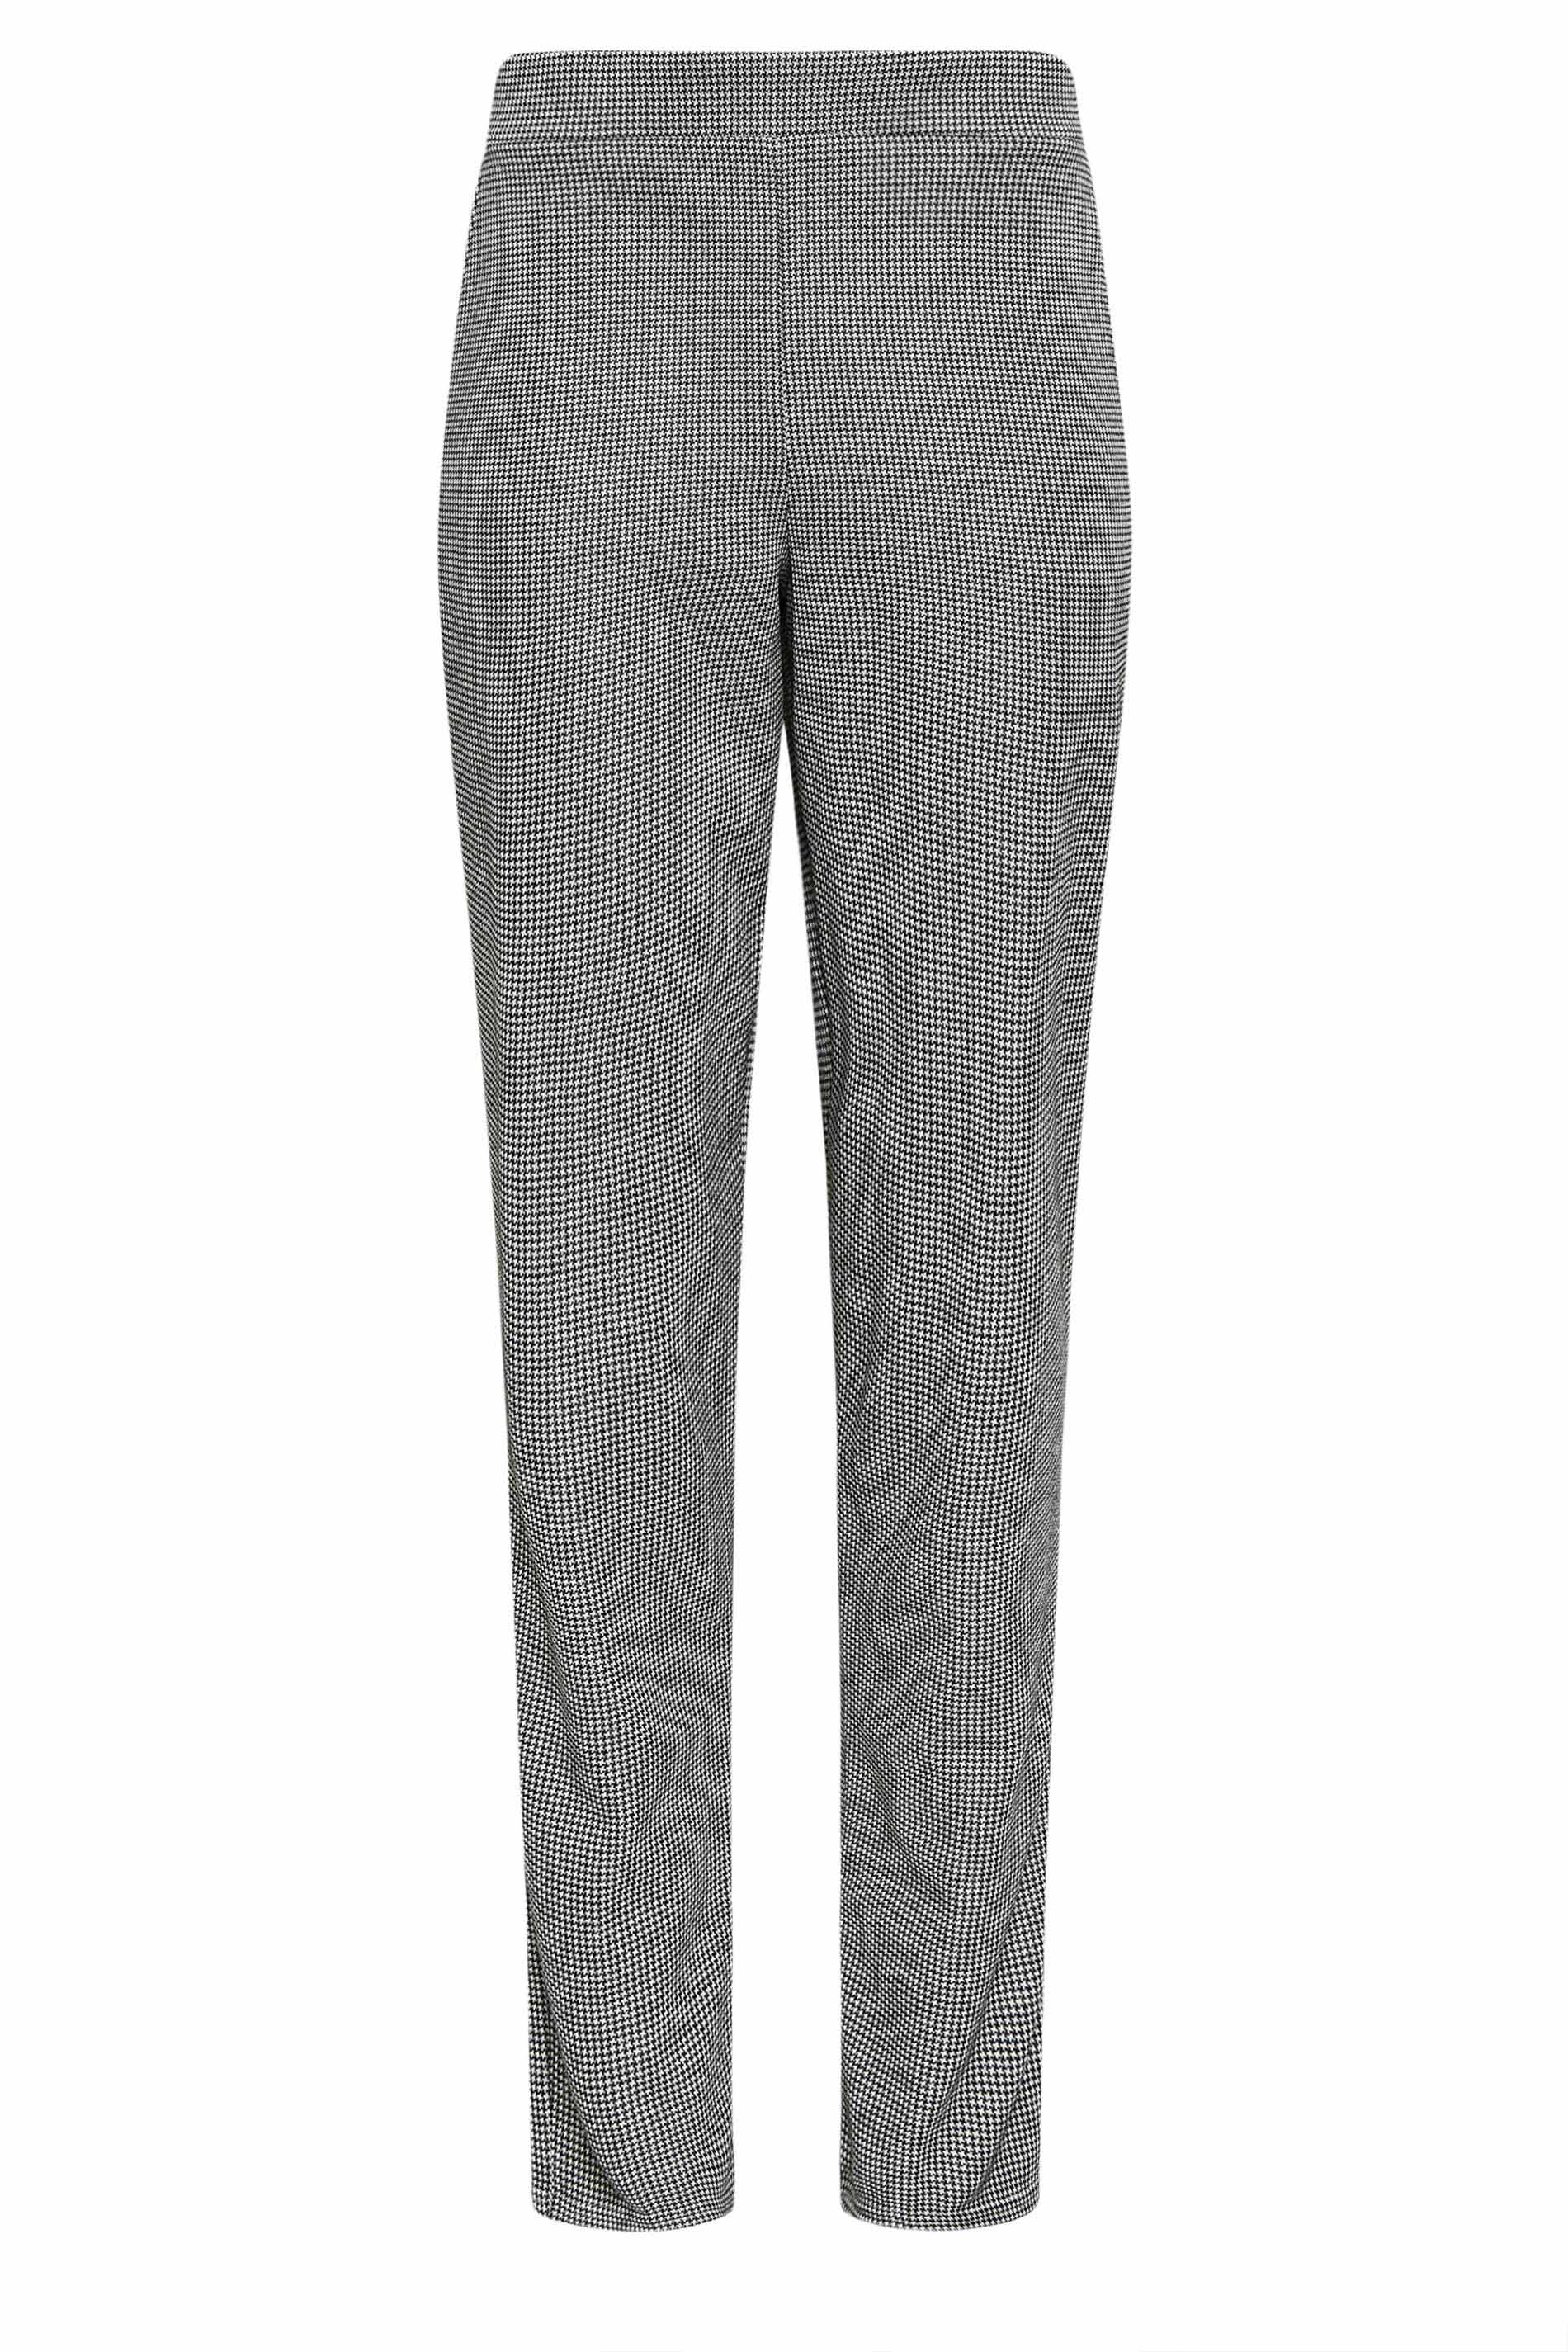 M&Co Black & White Dogtooth Trousers | M&Co